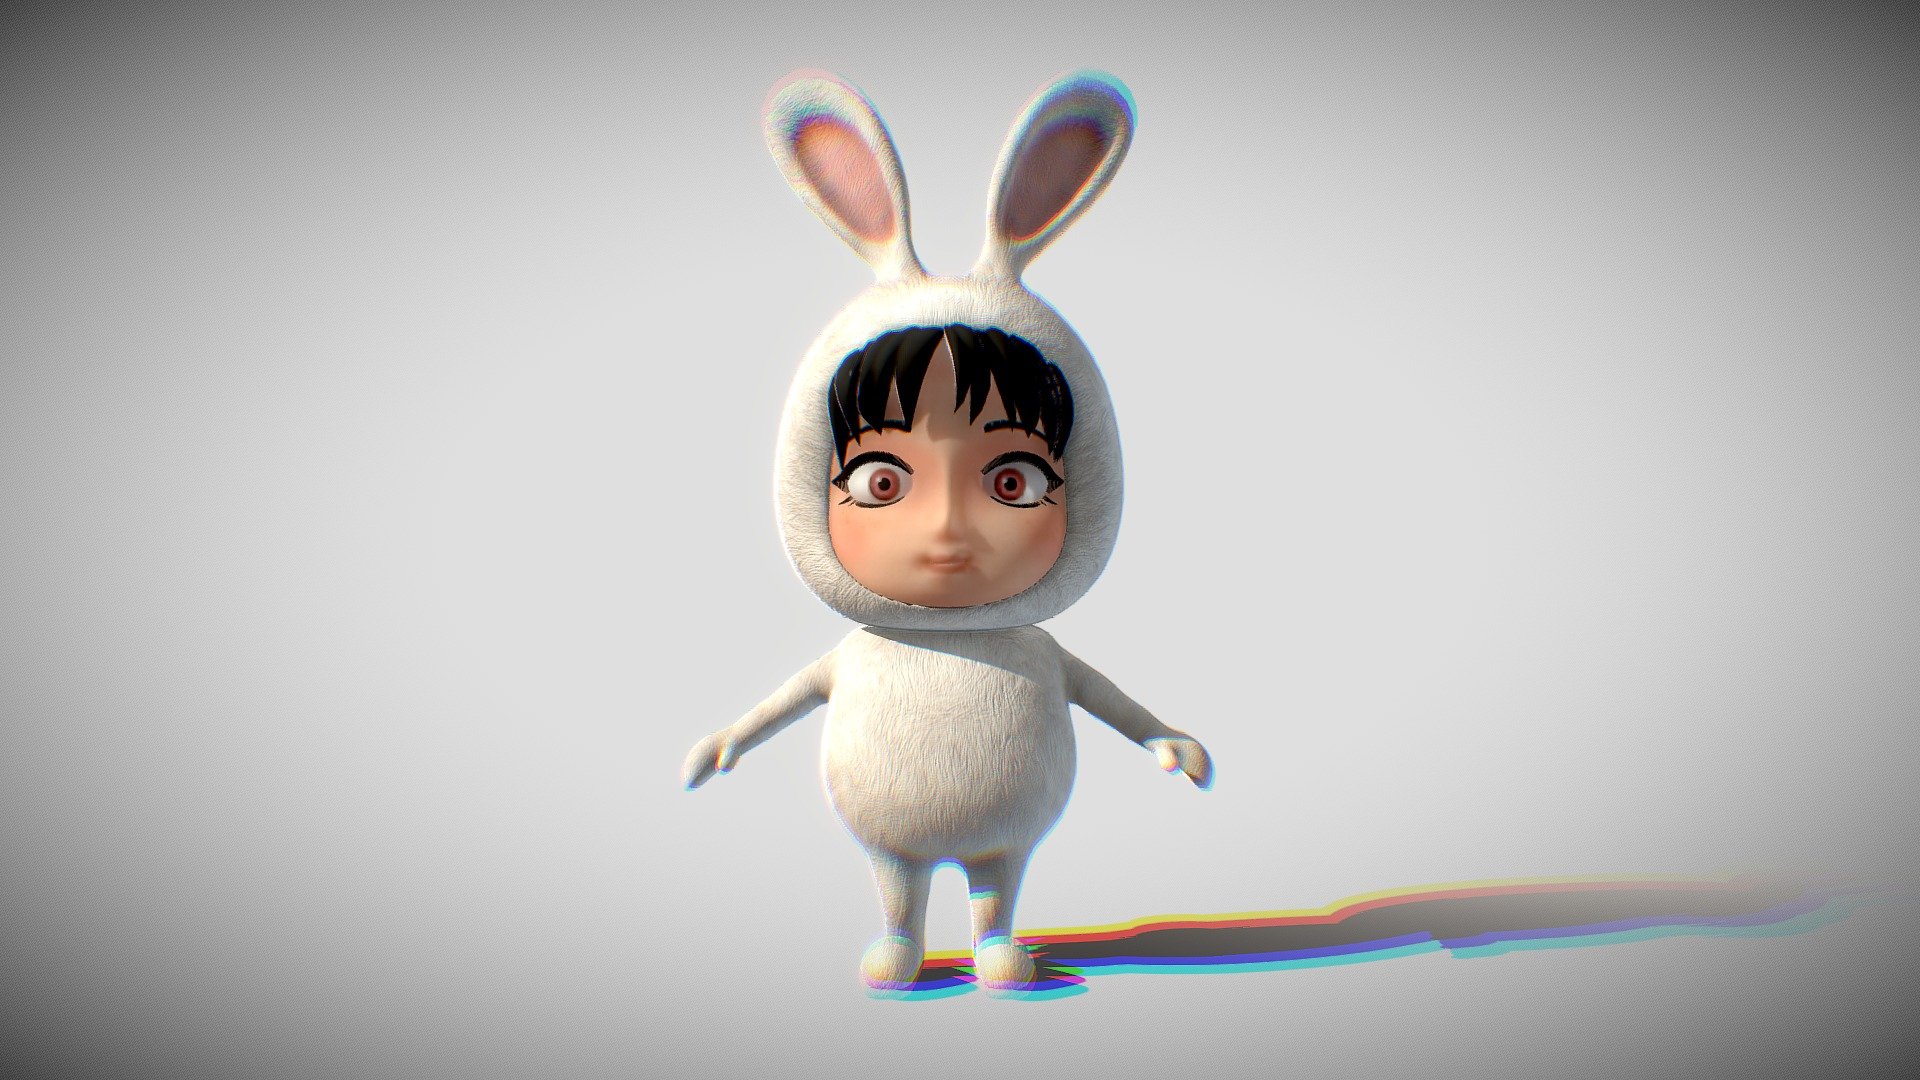 A lovely cartoon rabbit, a map, a binding, can do animation, film and television animation model, complete file attachment
= = = = = = = = = = = = = = = = = = = = = = = = = = = = = = = = = = = = = = = = = = = = = = = =
Other works ~ welcome to visit my home page - Cartoon rabbit rabbit girl cartoon of children - Buy Royalty Free 3D model by mpc199075 3d model